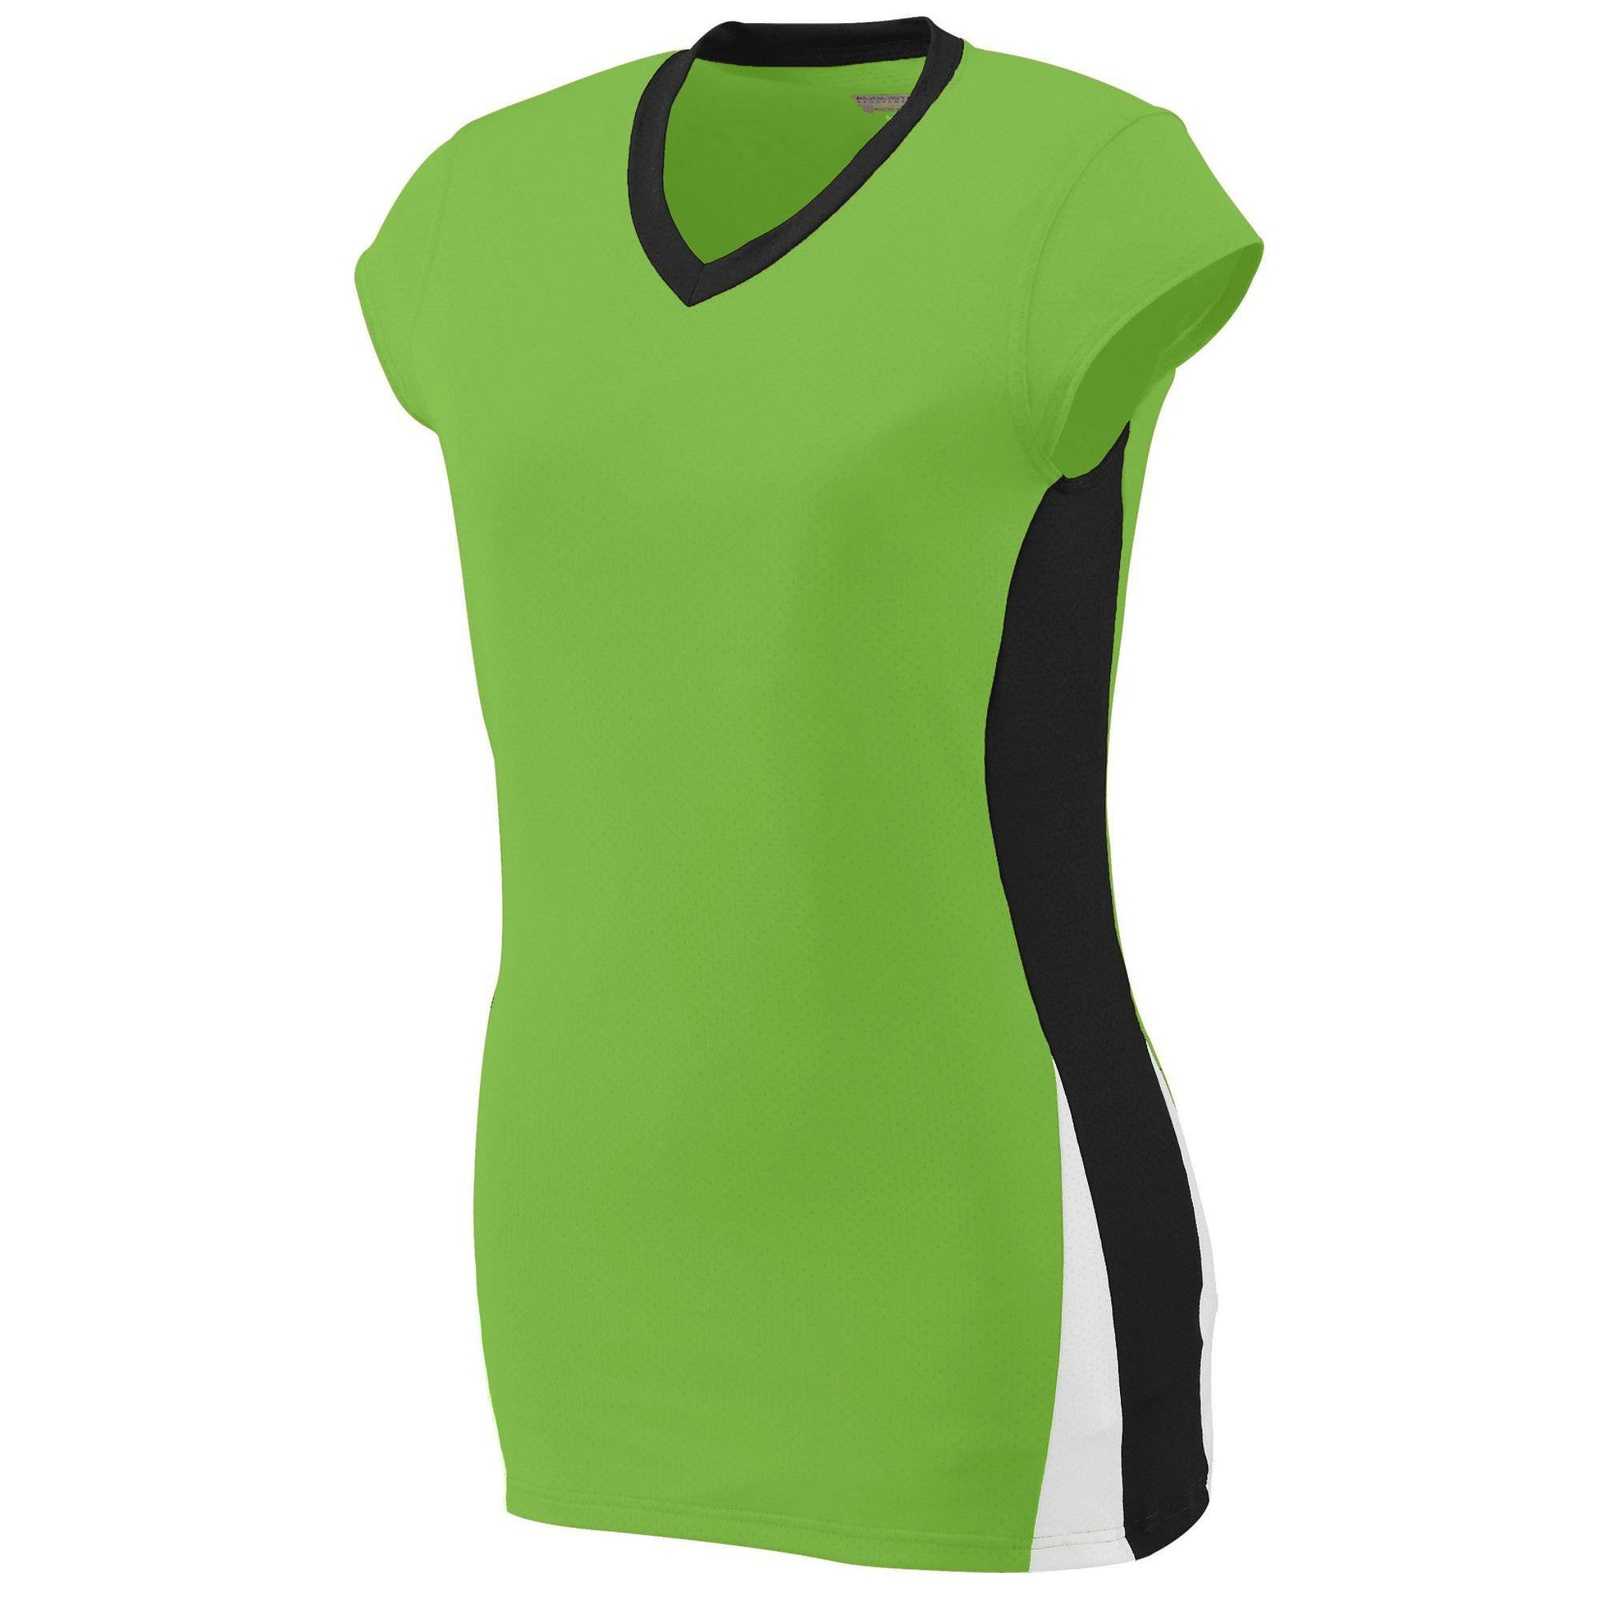 Augusta 1310 Ladies Hit Jersey - Lime Black White - HIT a Double